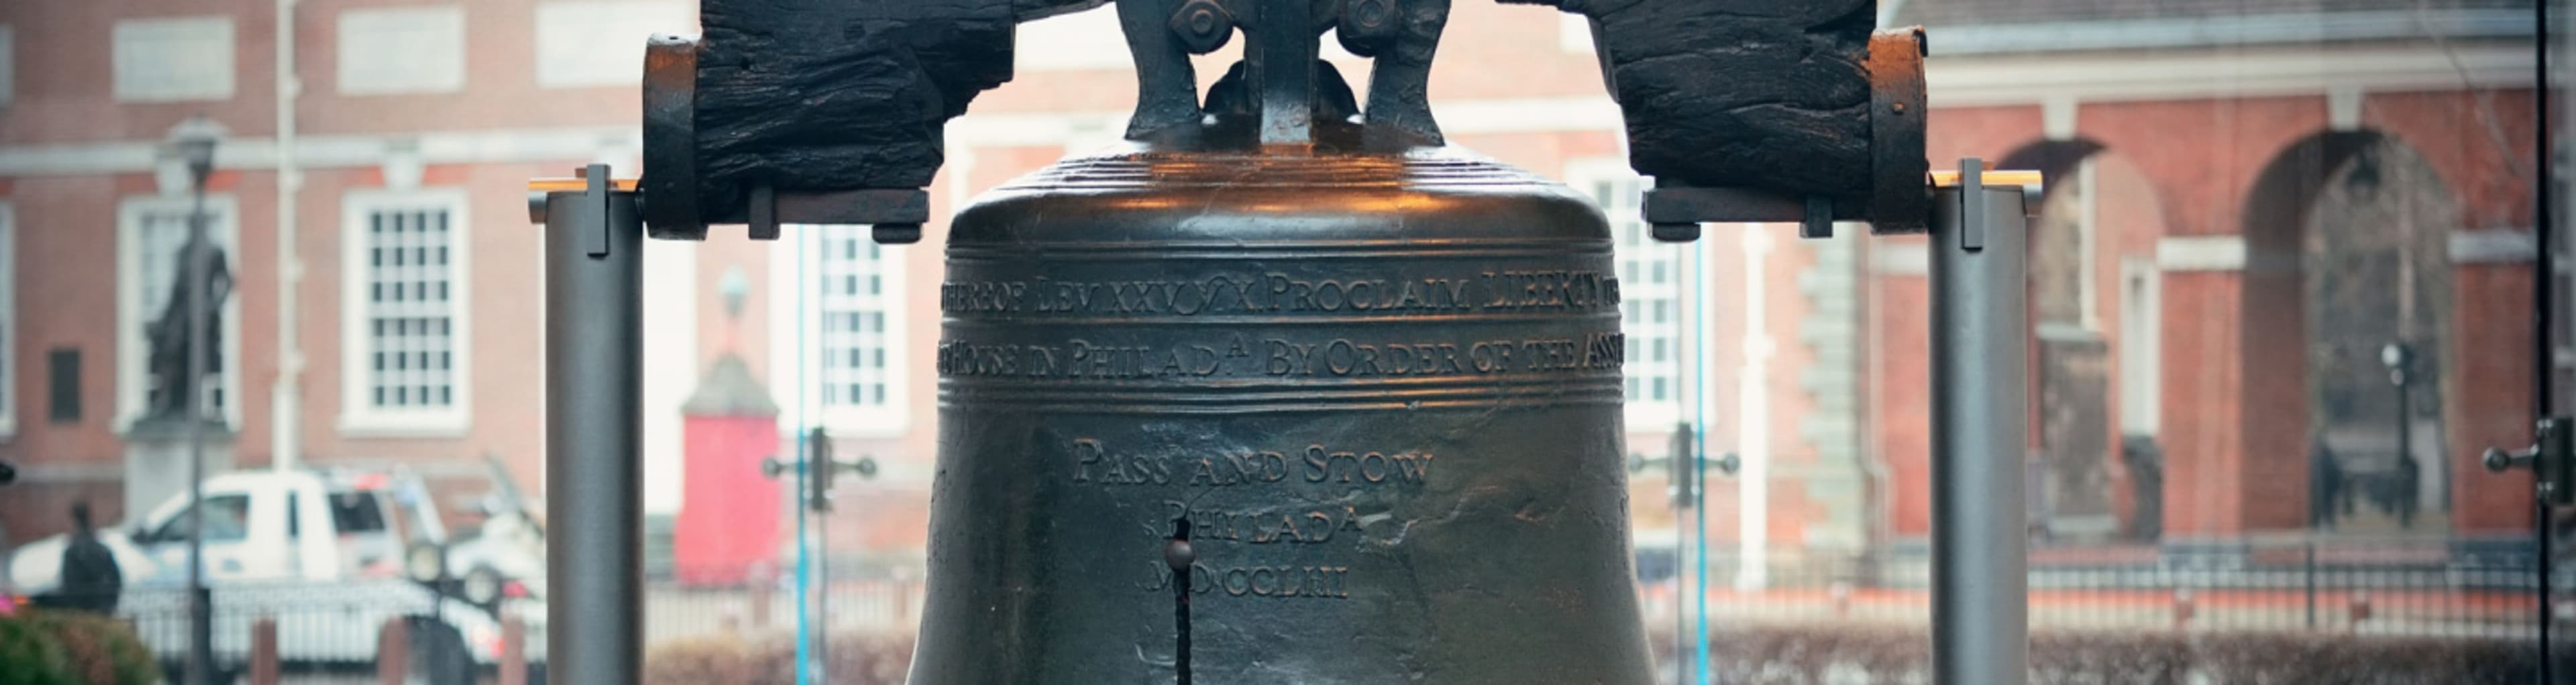 free things to do in philadelphia see the liberty bell